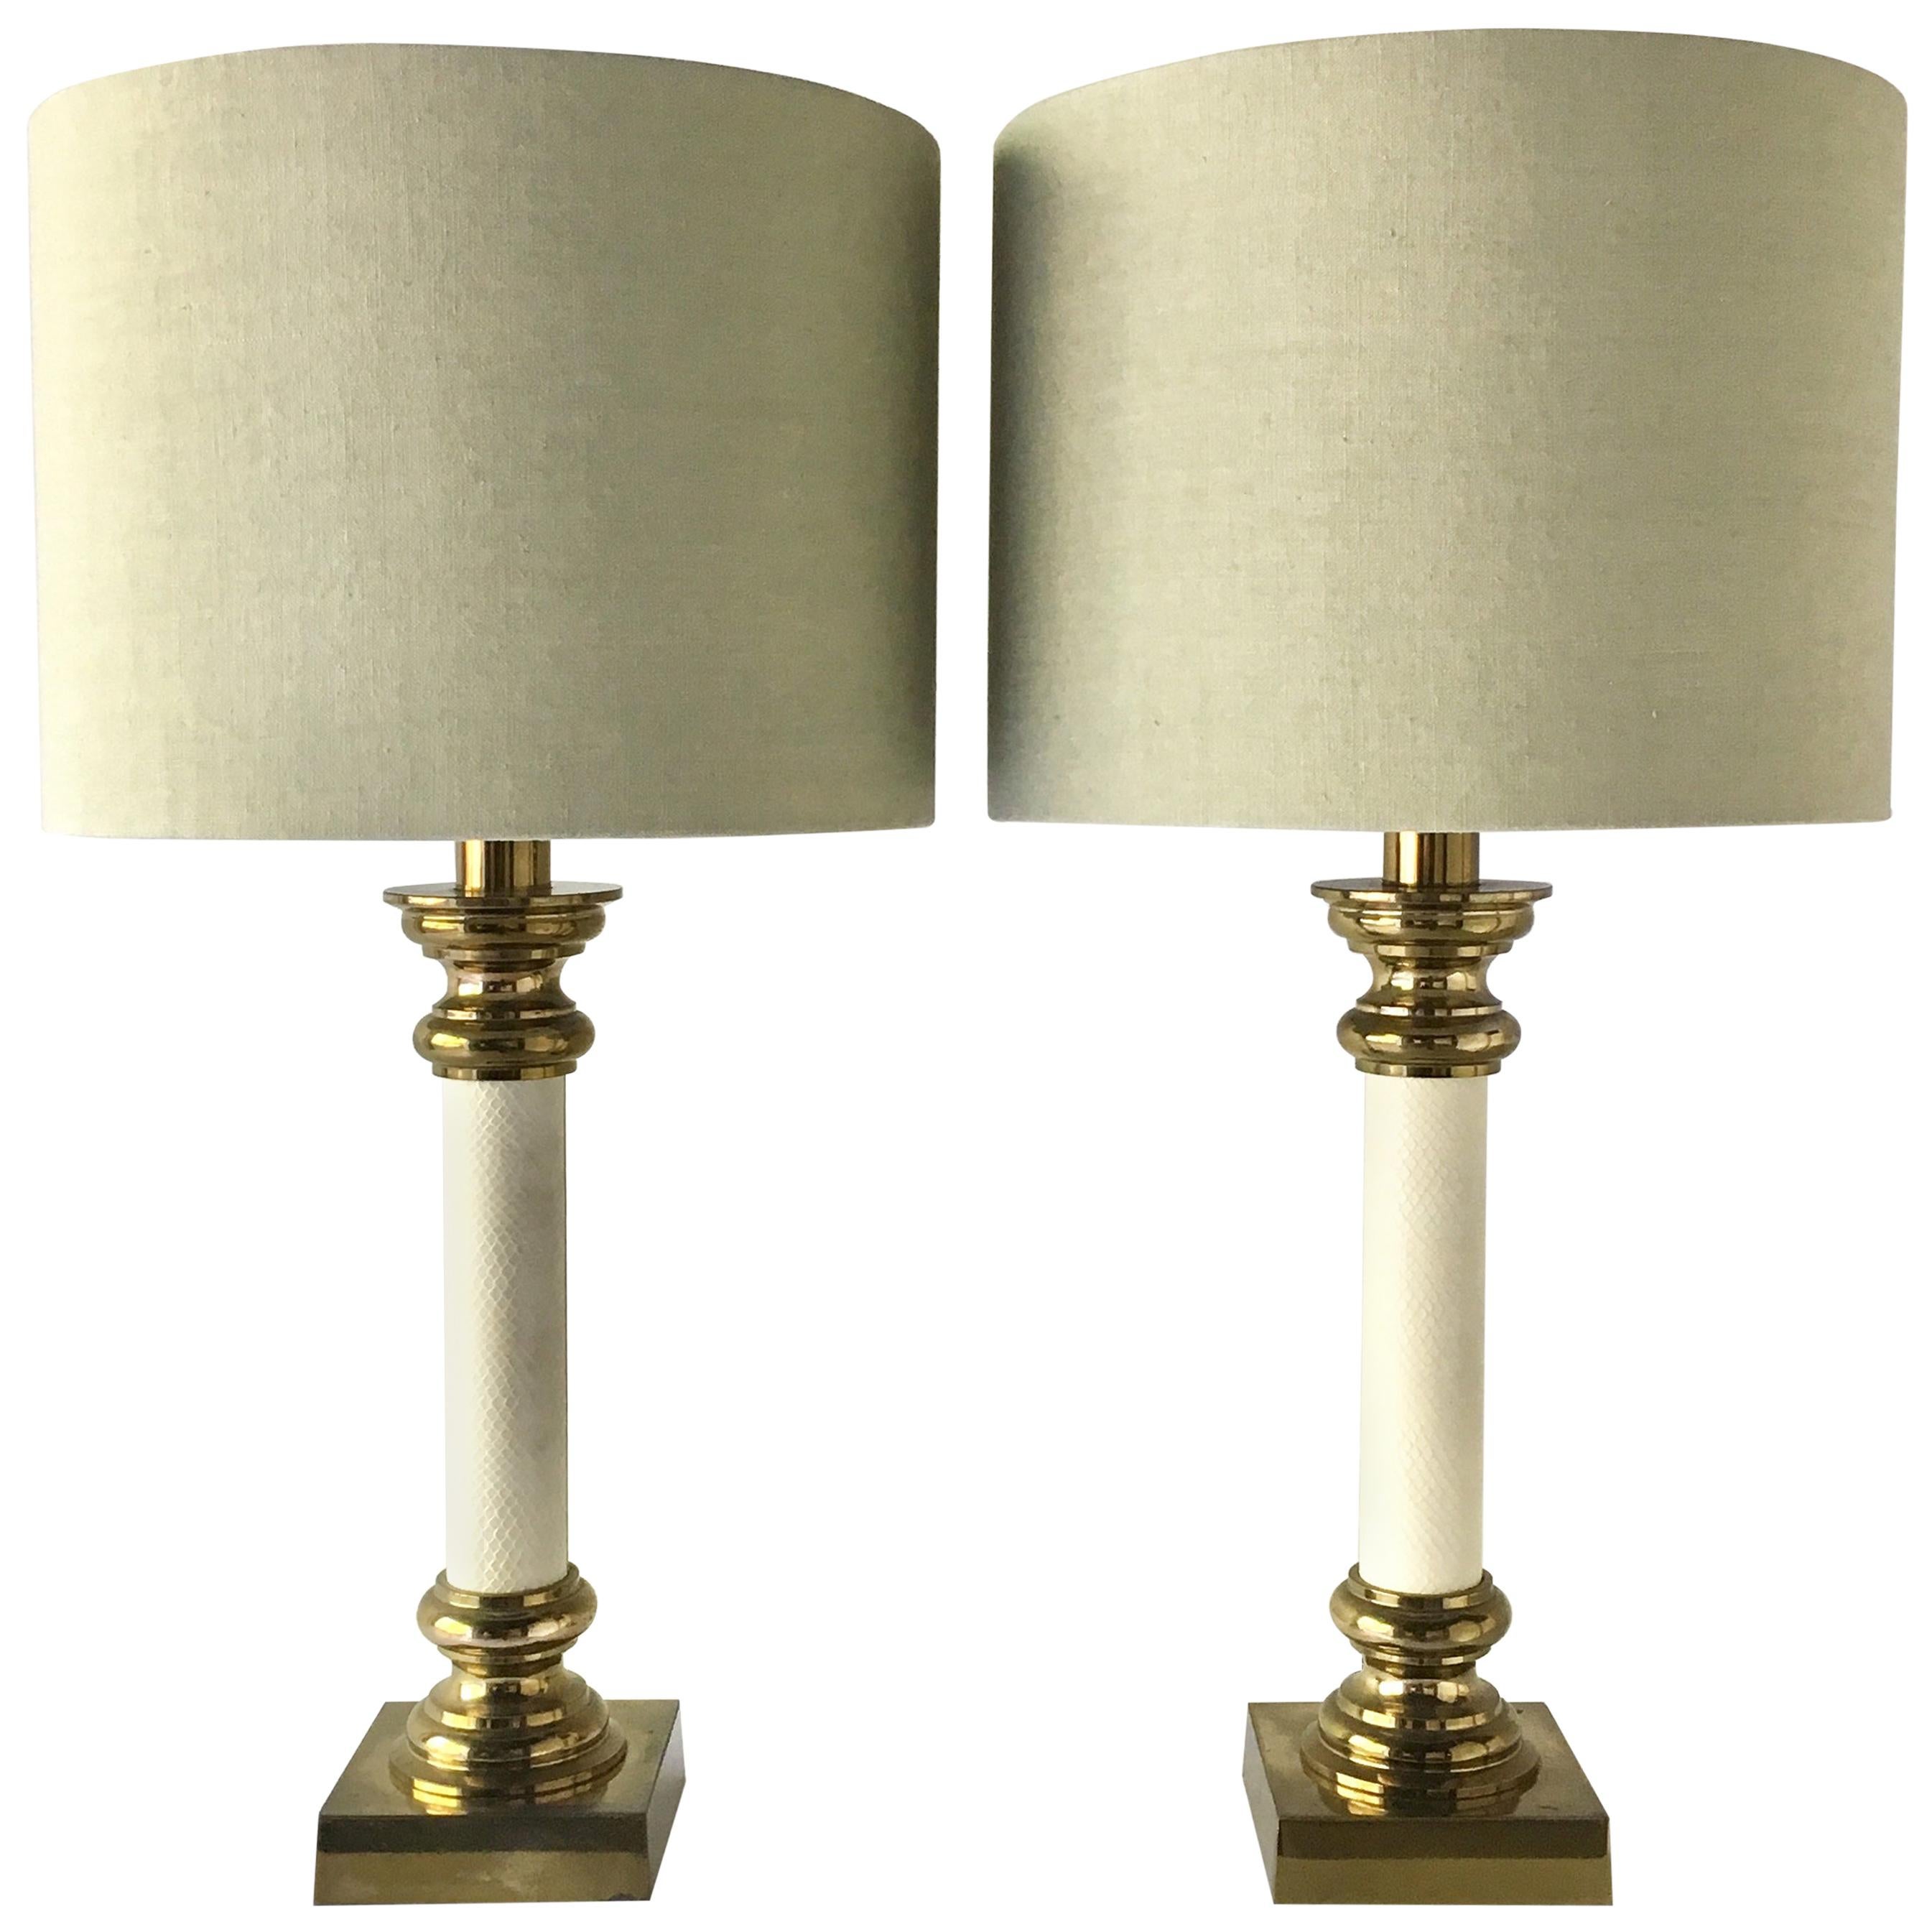 Pair of Rembrandt Brass and Faux Snakeskin Table Lamps, 1960s